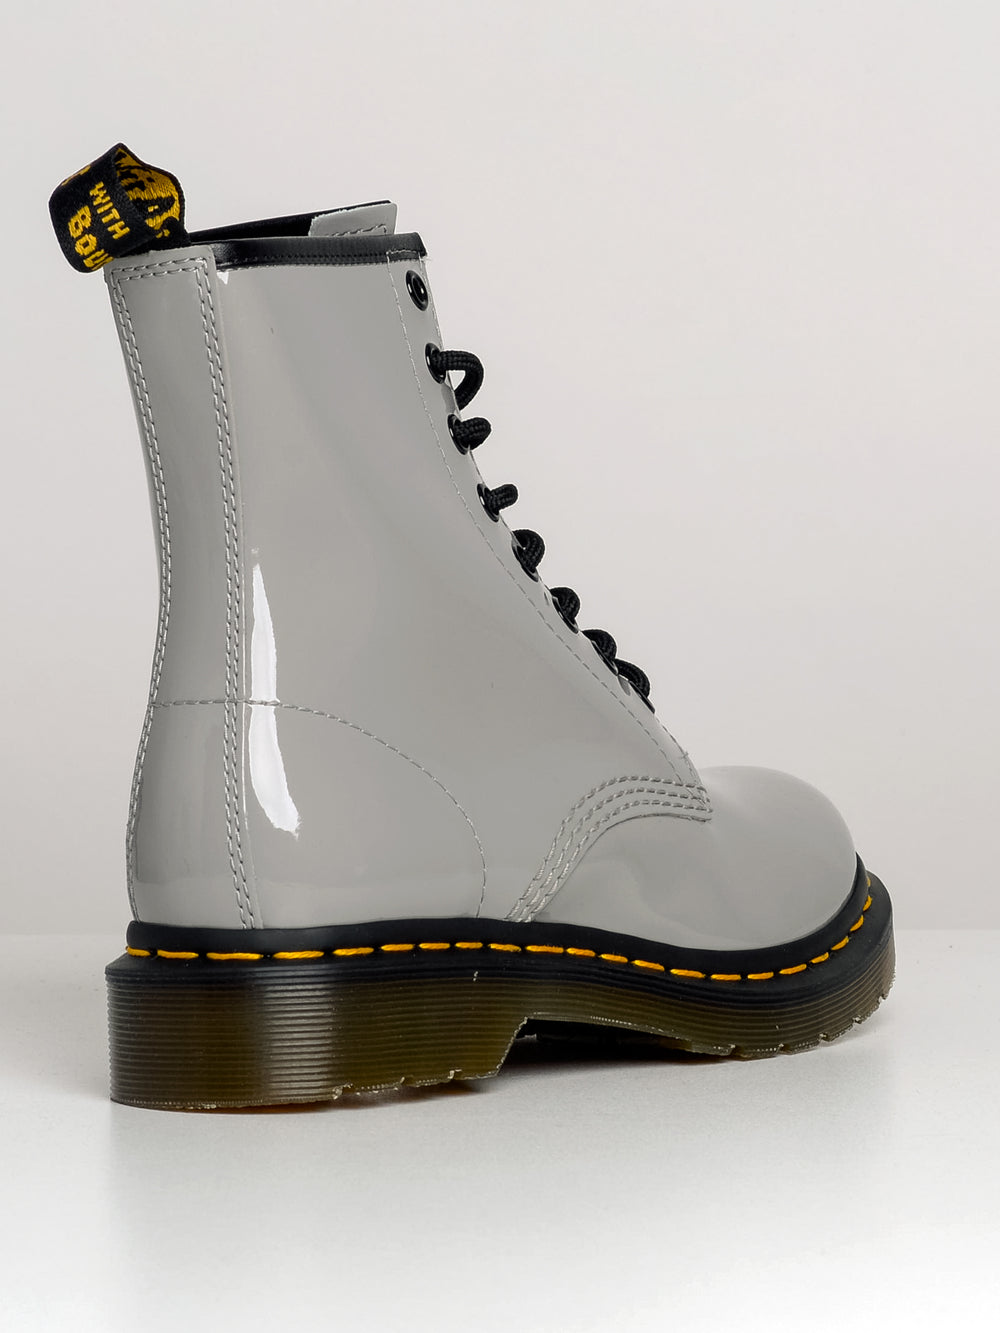 WOMENS DR MARTENS 1460 PATENT LAMPER - CLEARANCE